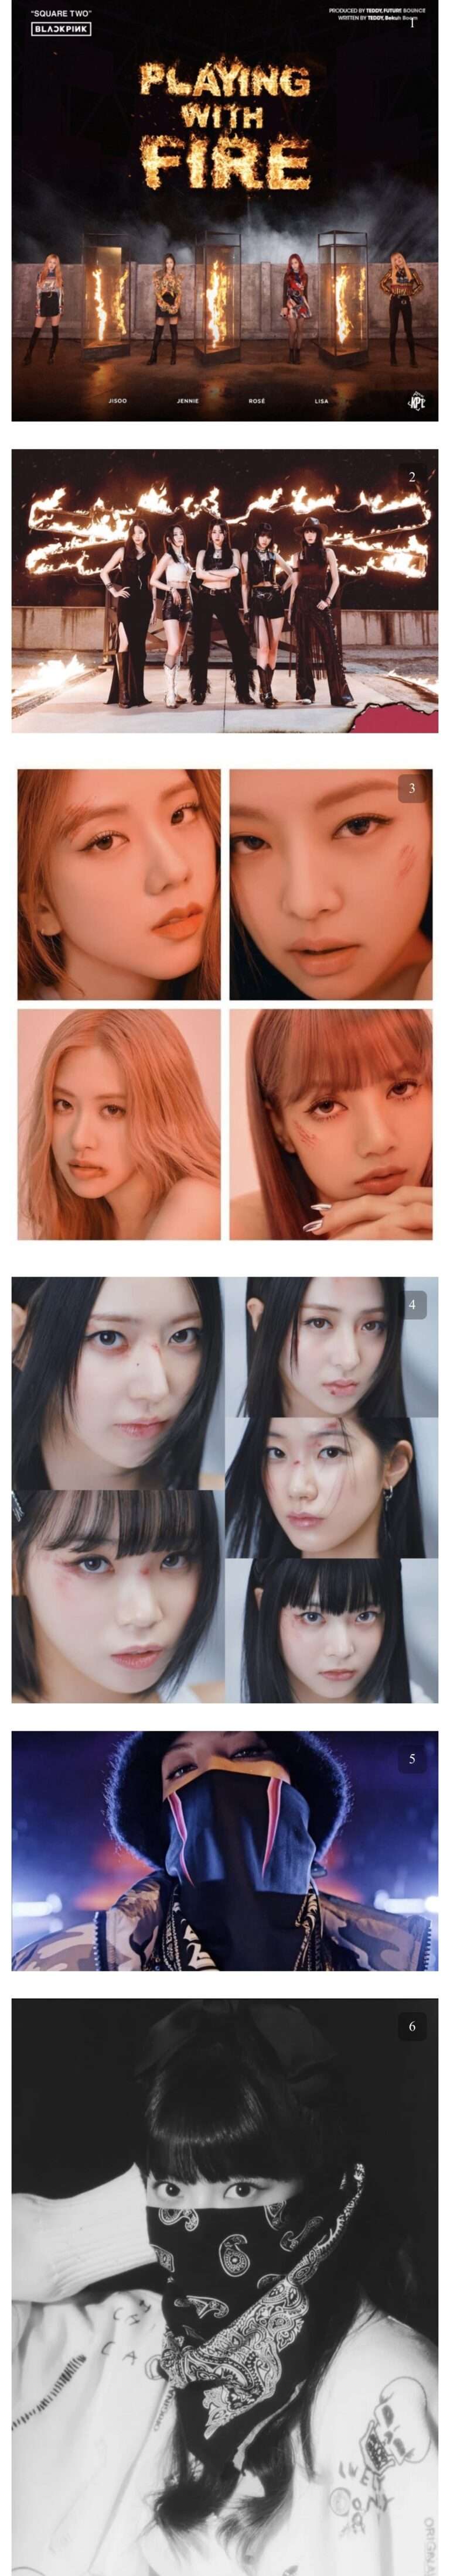 A netizen is claiming that this concept of LE SSERAFIM is totally copying BLACKPINK